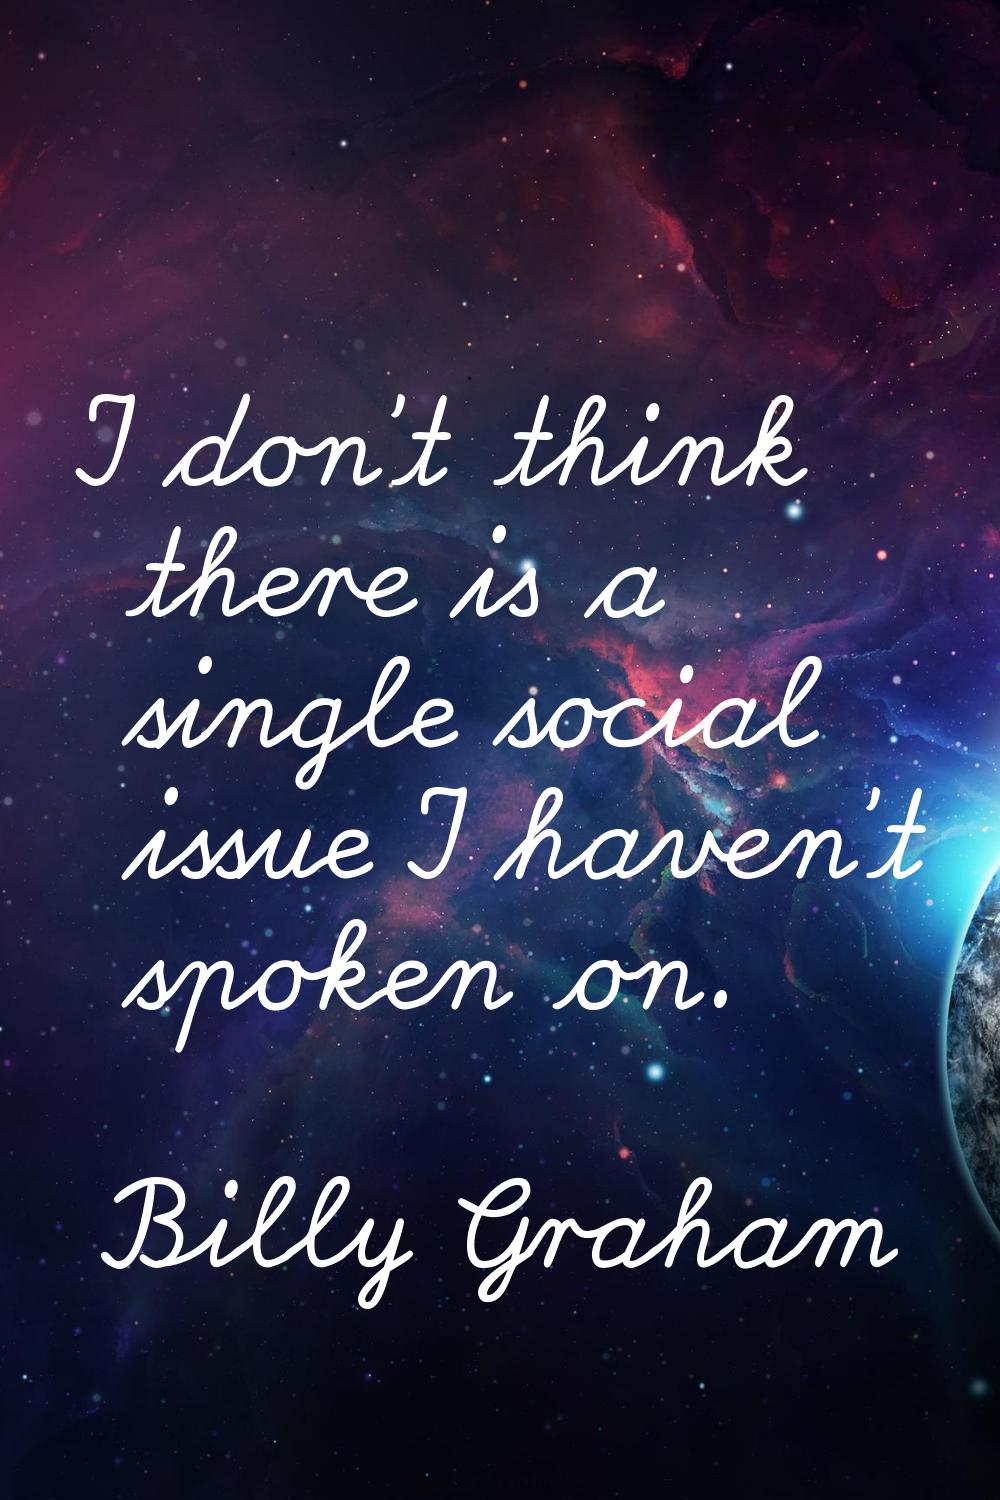 I don't think there is a single social issue I haven't spoken on.